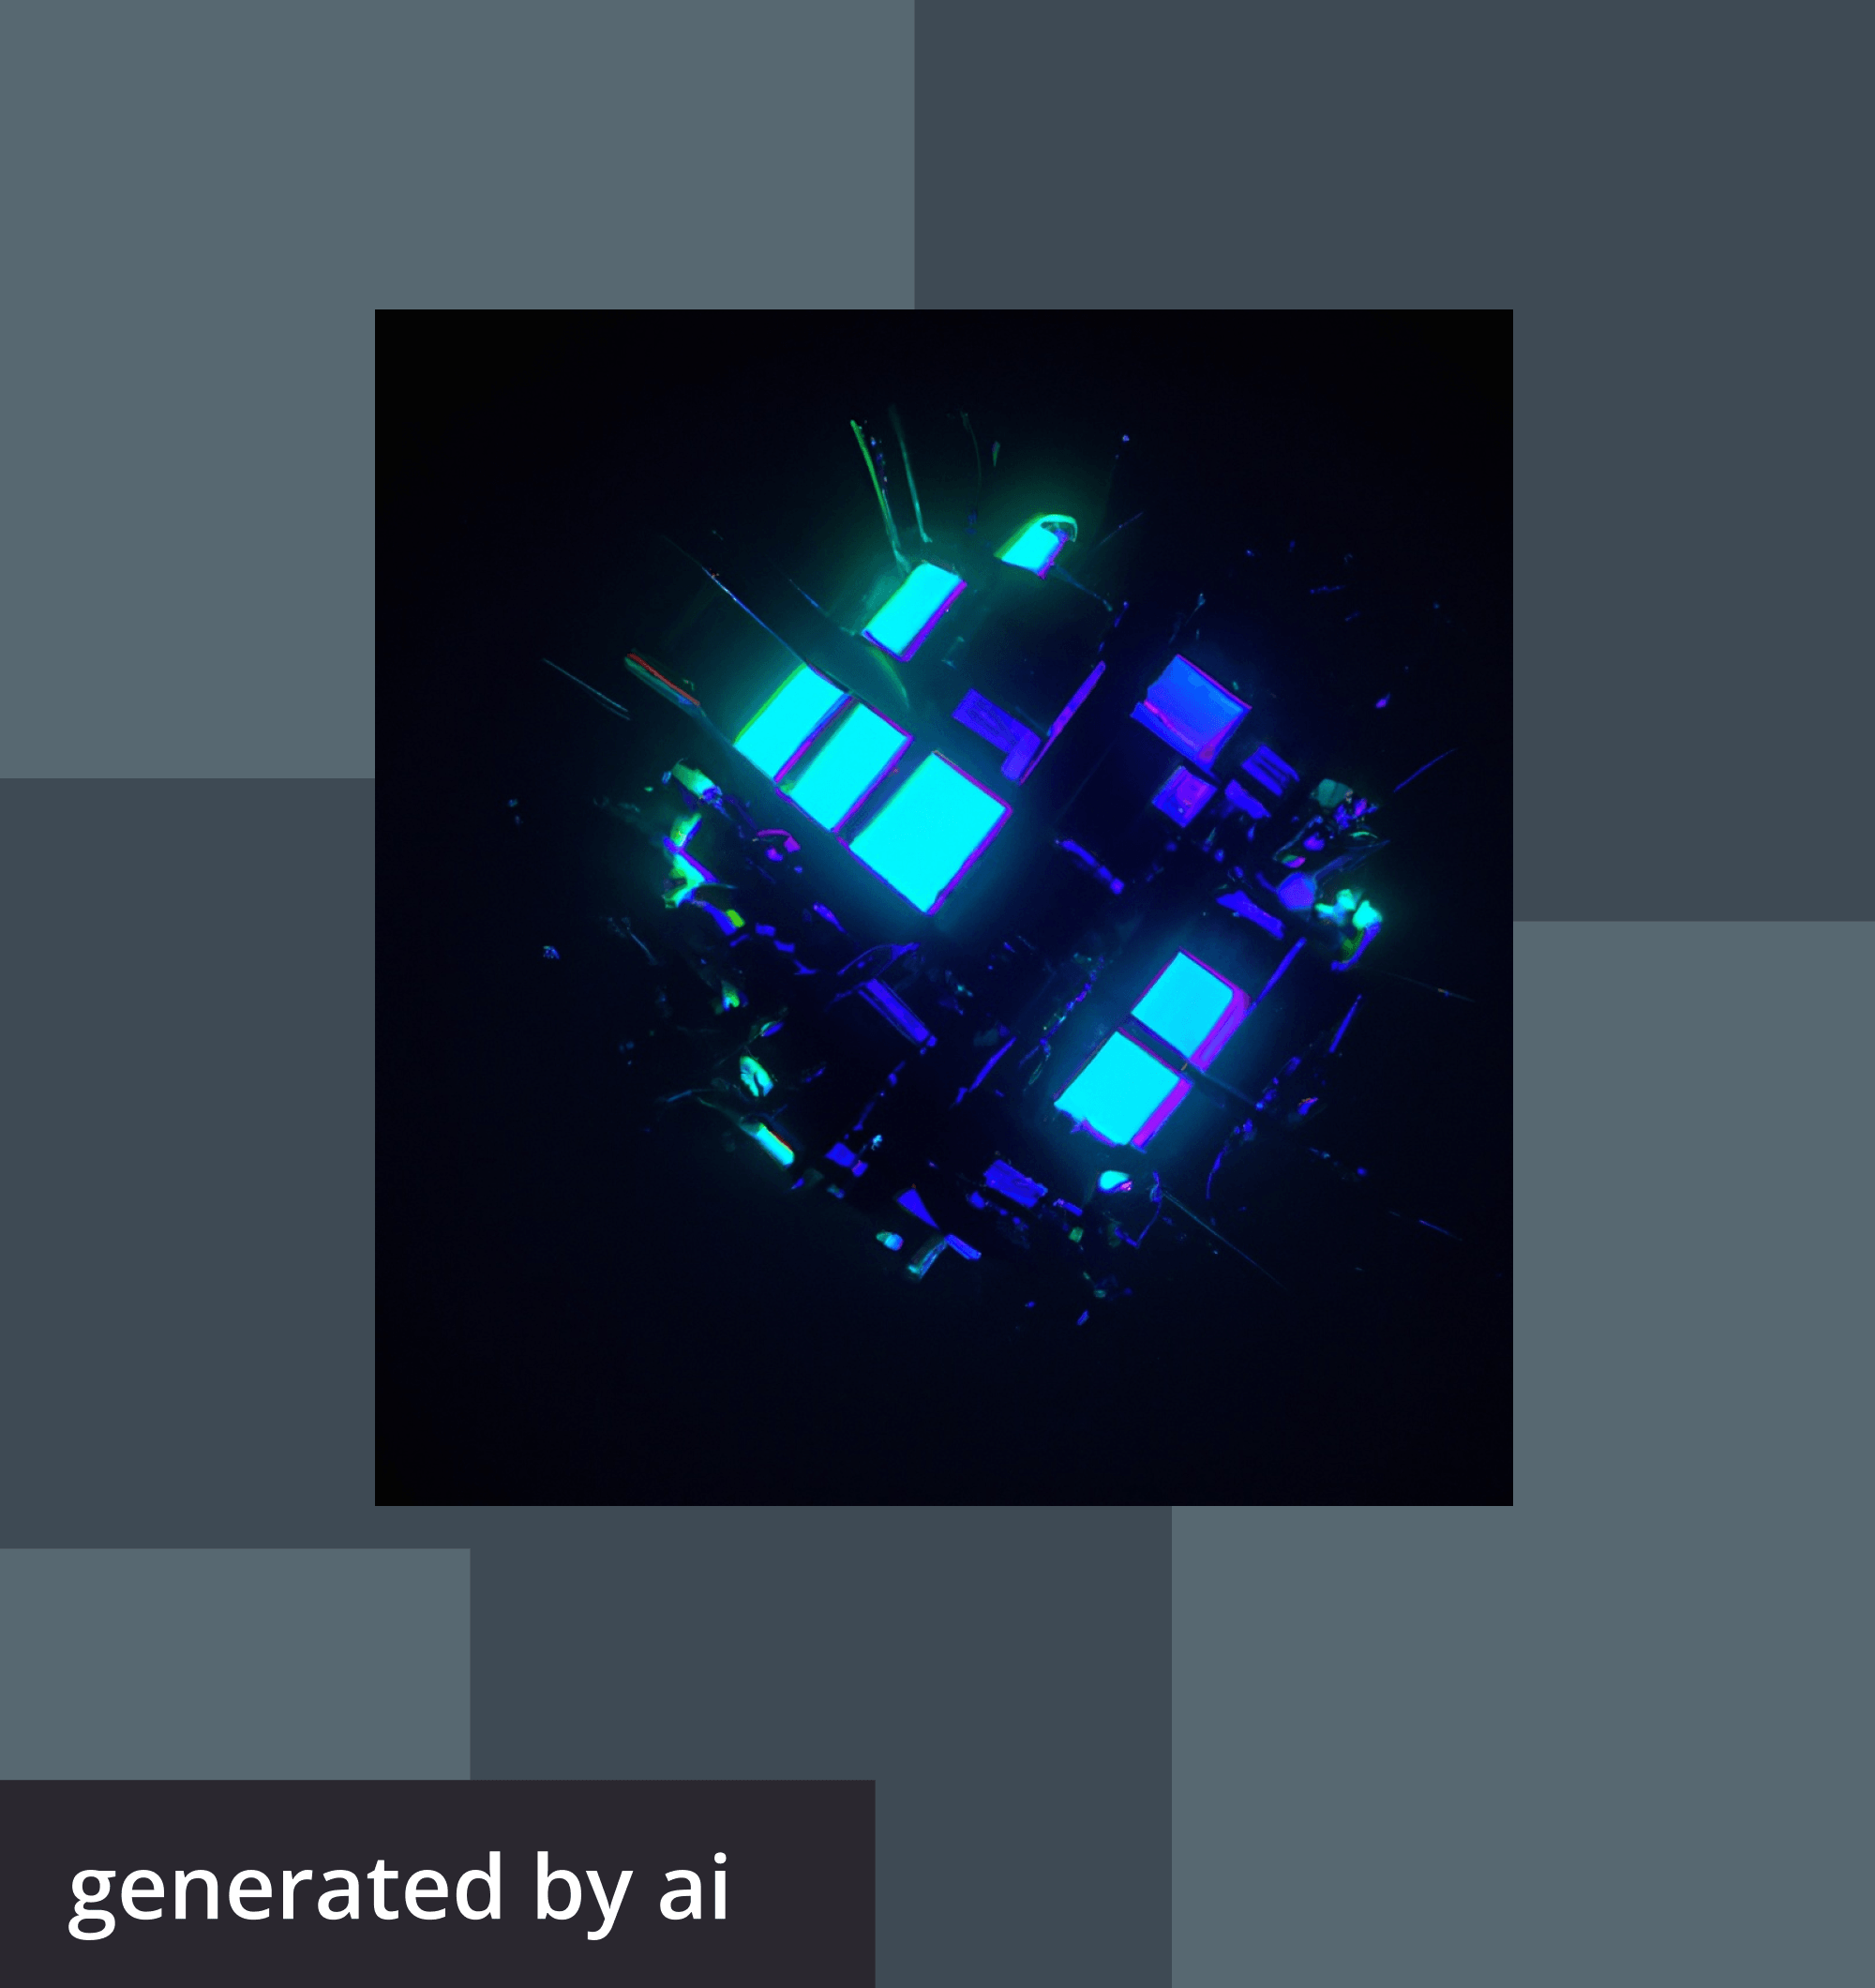 An AI-generated image with bright blue squares clustered together over a black background